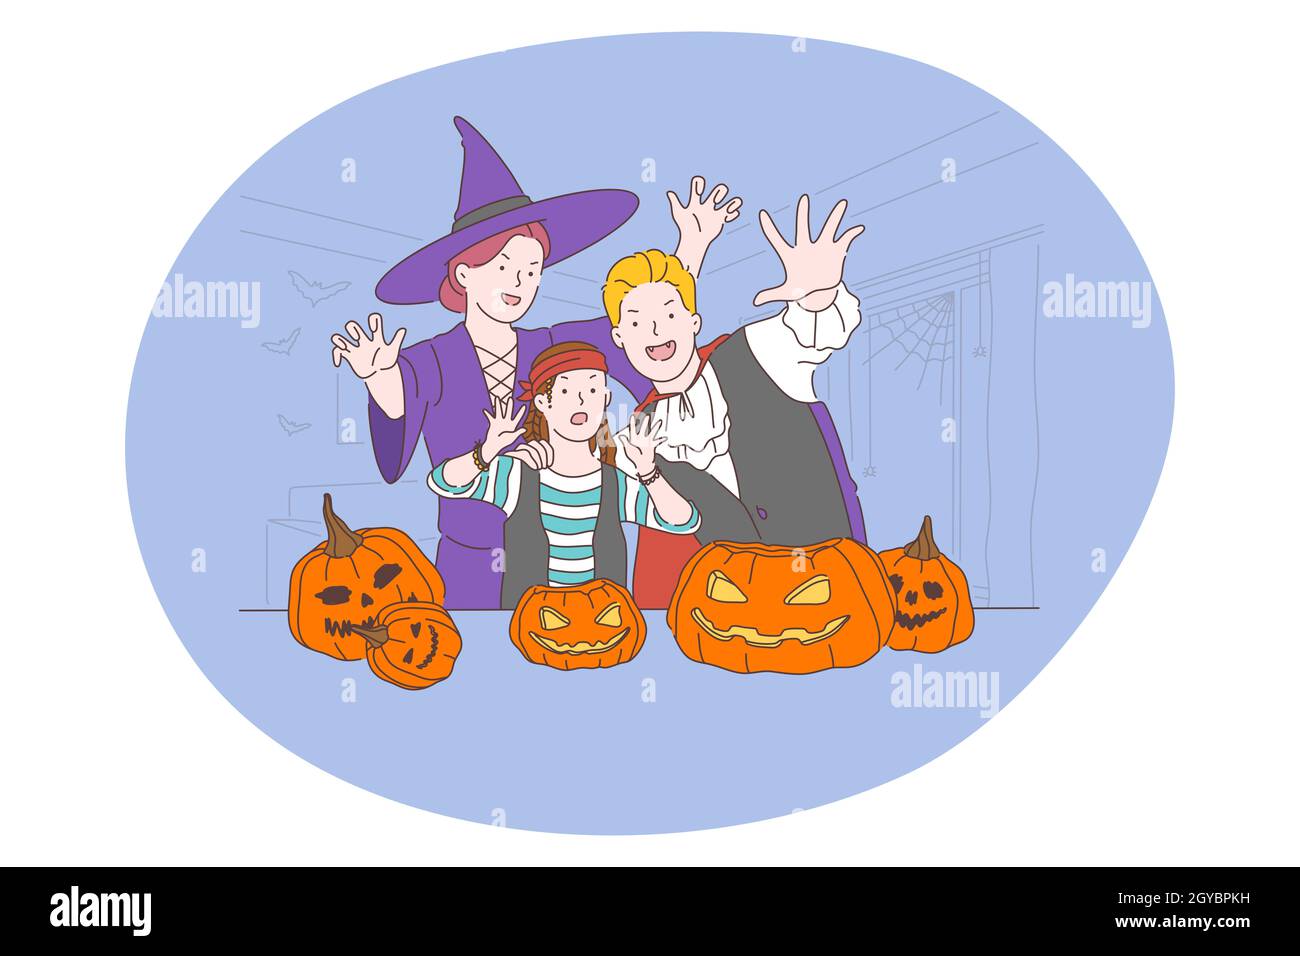 Celebrating Halloween holiday in spooky costumes concept. Young family with child in festive scaring costumes celebrating Halloween day with many pump Stock Photo